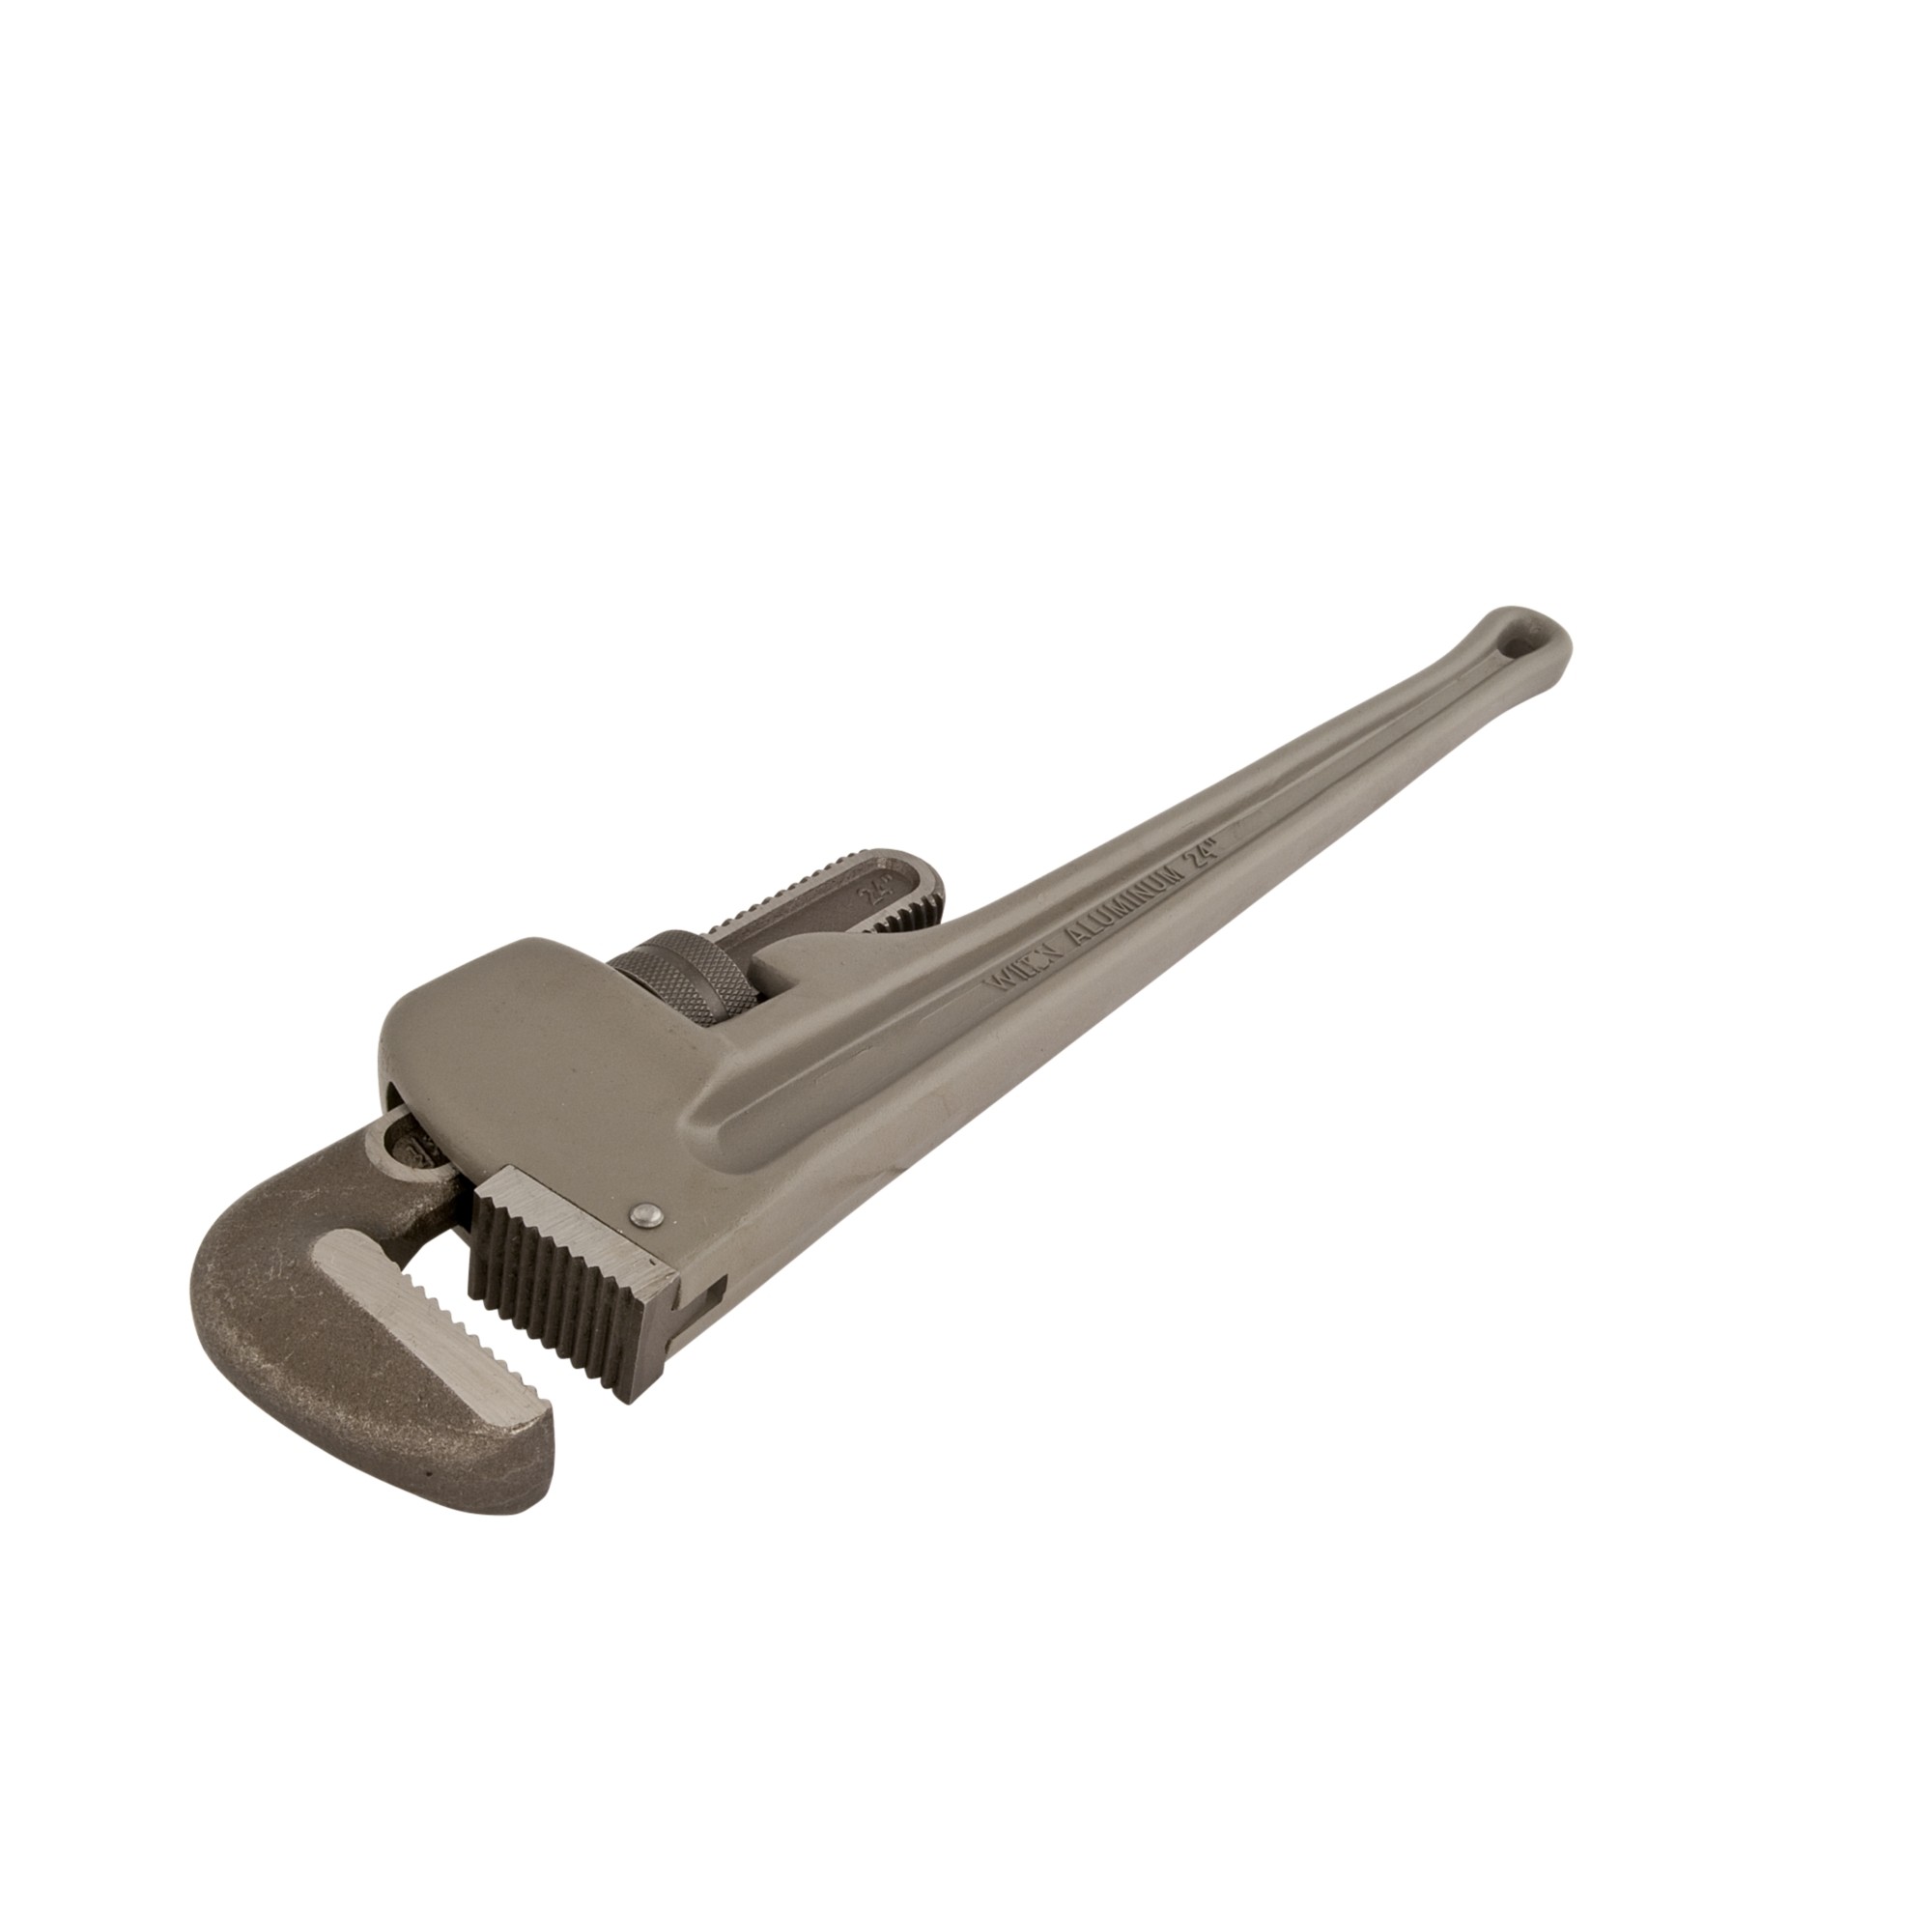 Wilton 38224, 24 Inch Aluminum Pipe Wrench